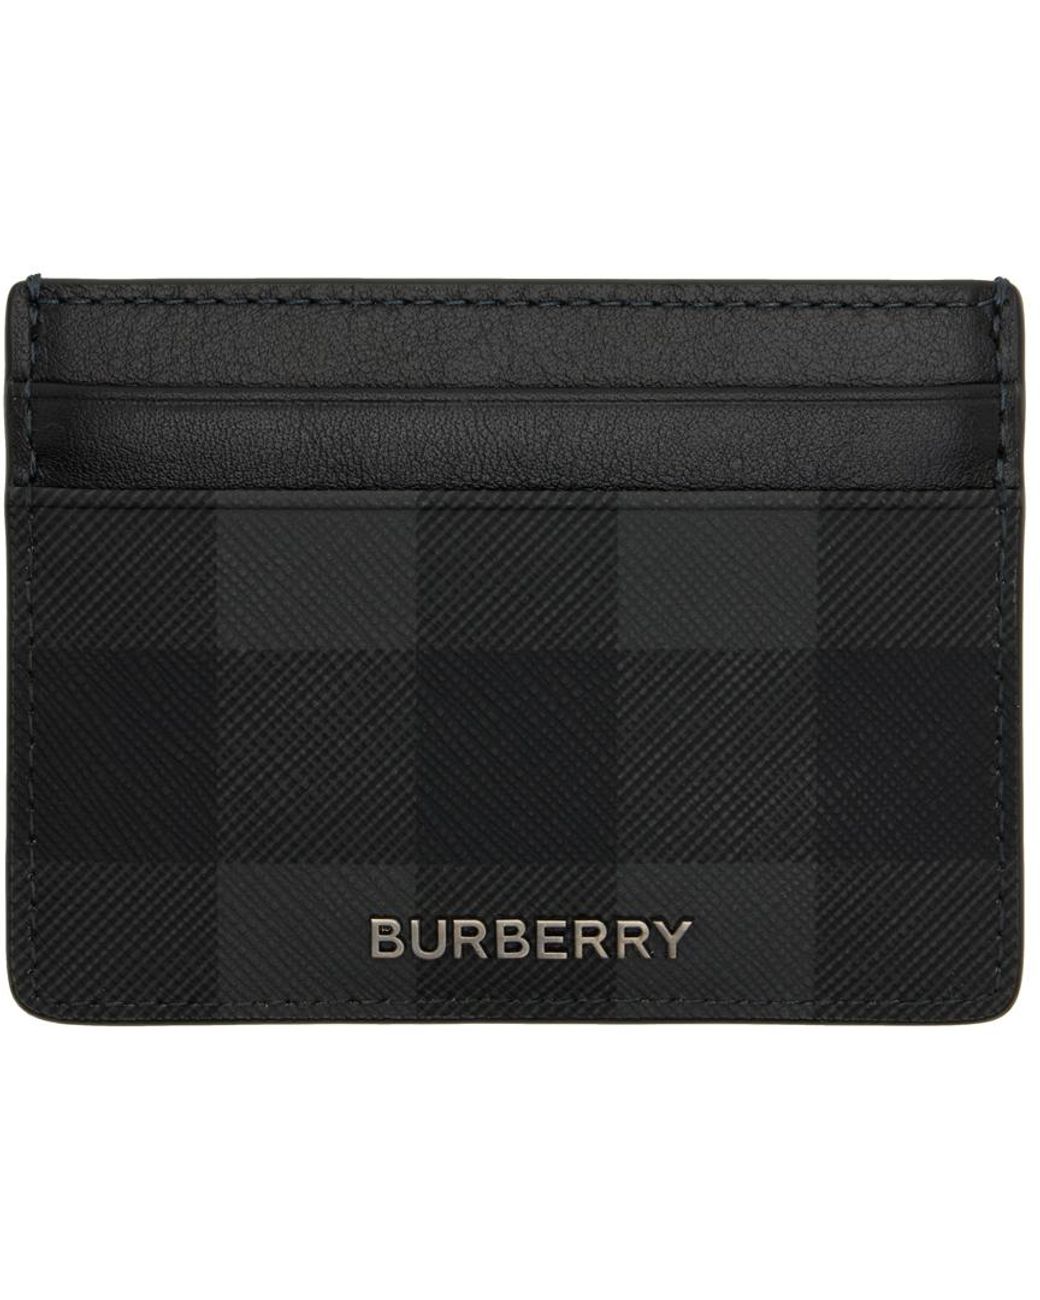 Burberry Canvas Check Card Holder in Charcoal (Black) for Men | Lyst